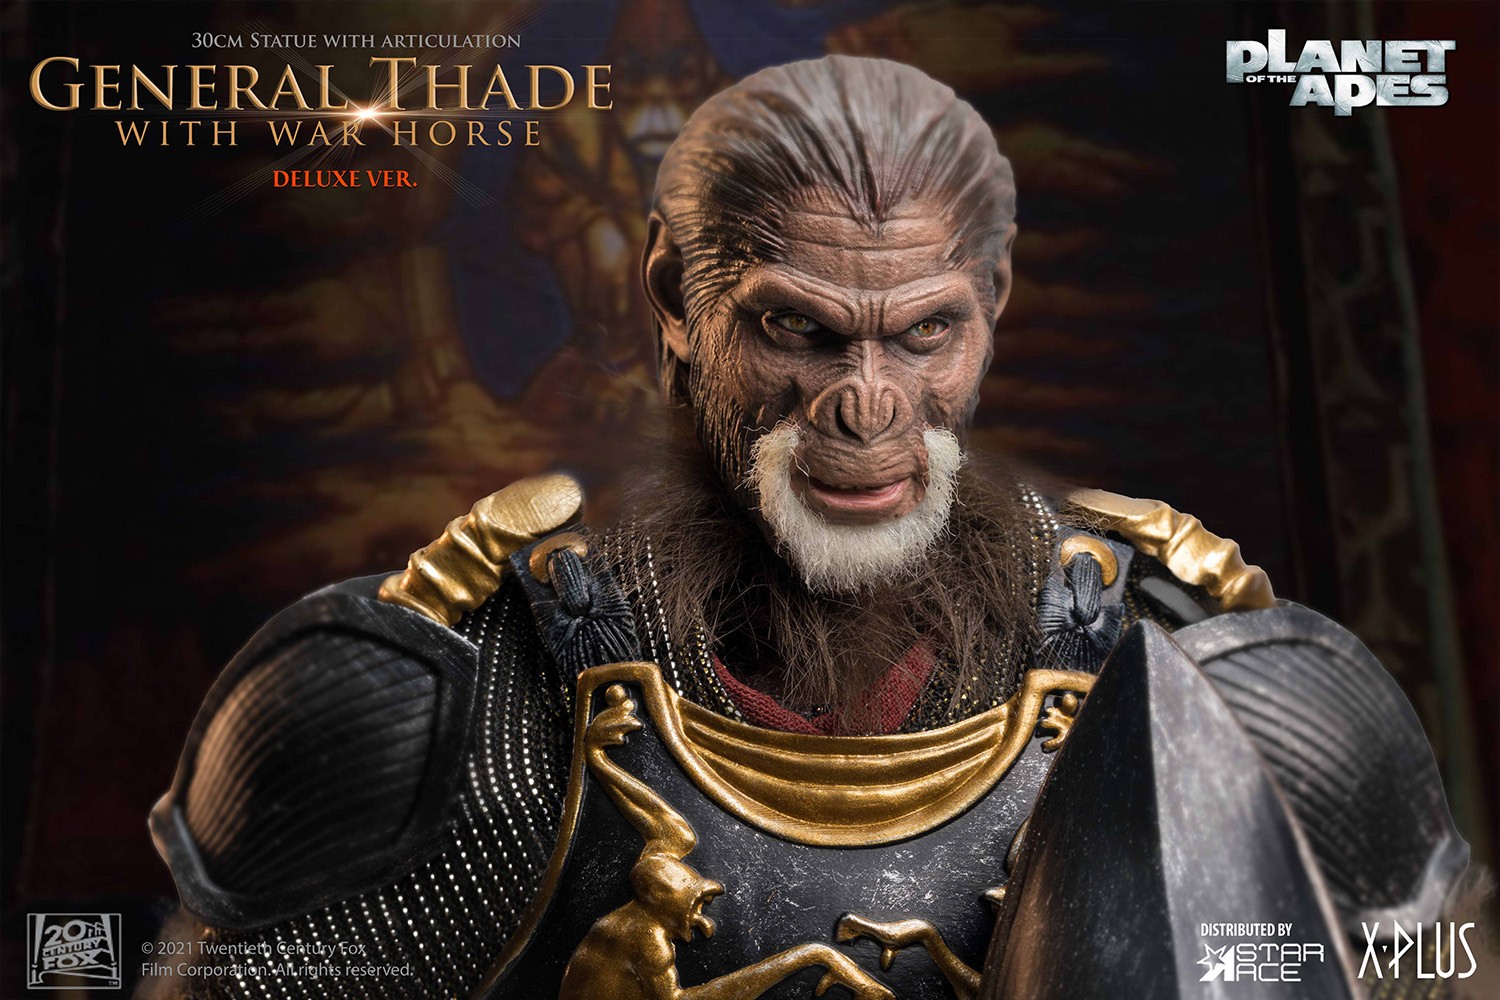 General Thade Collector Edition - Prototype Shown